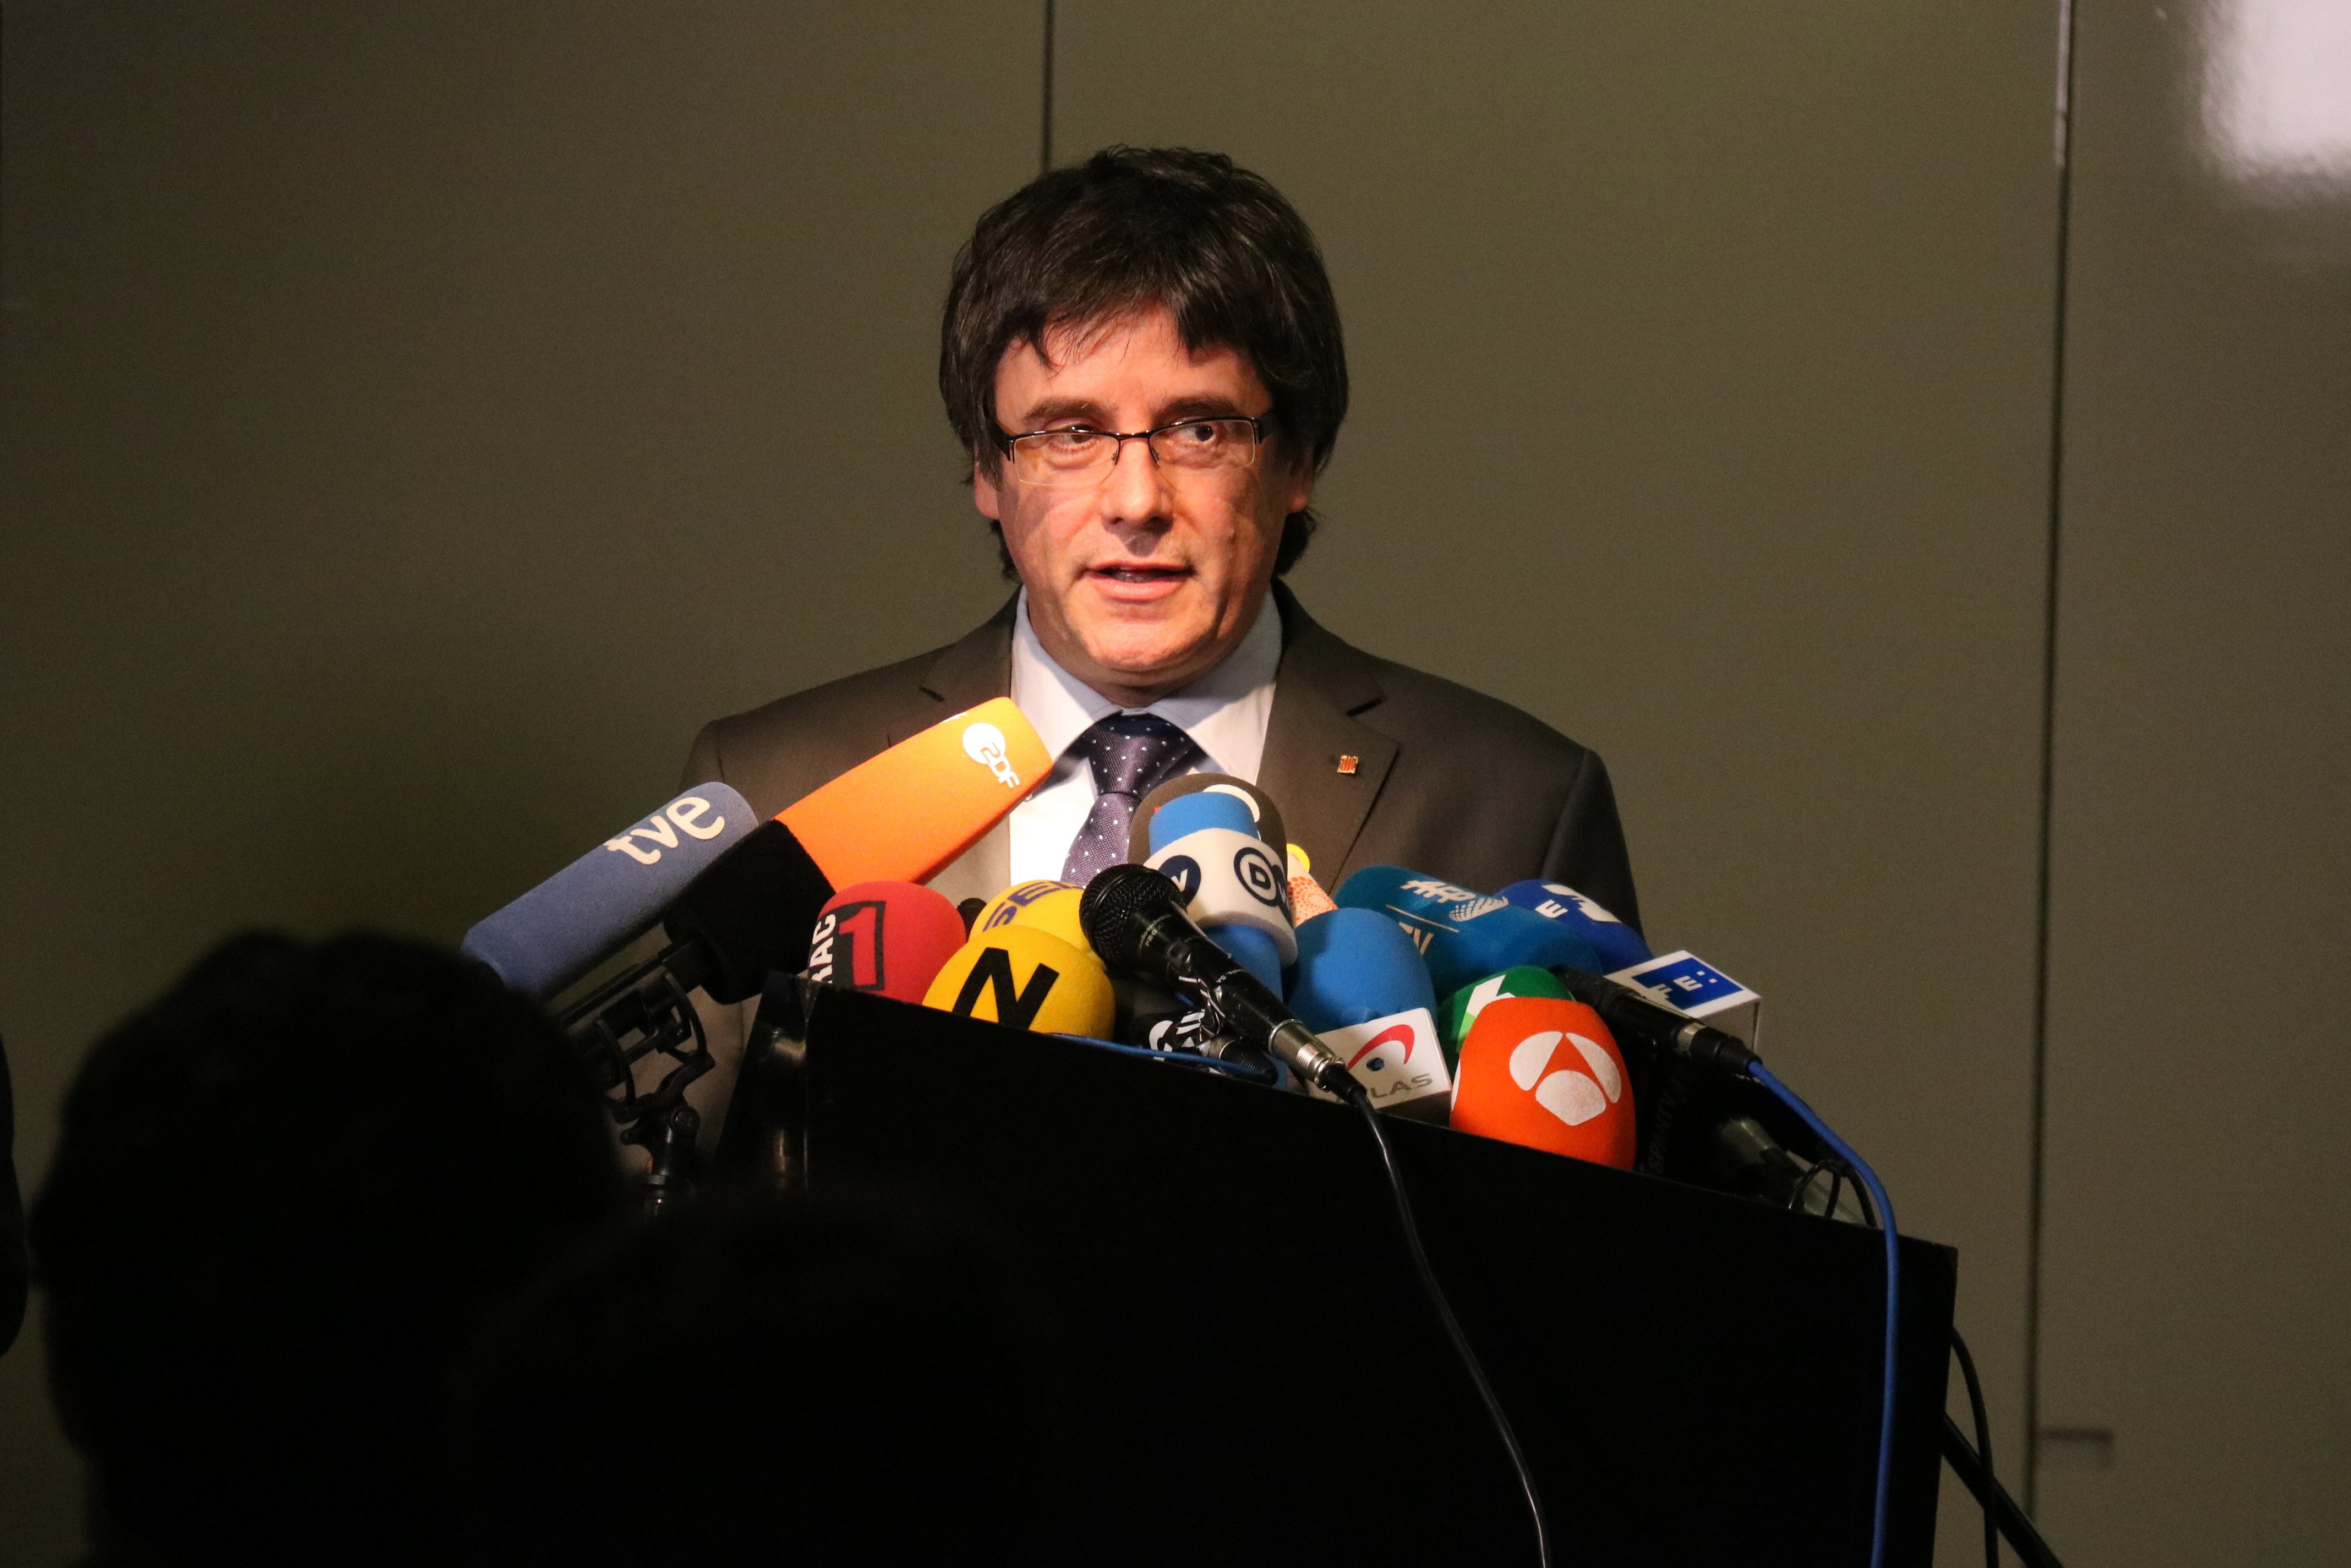 Puigdemont on Borrell: "Bringing back personalities like that is their gesture?"